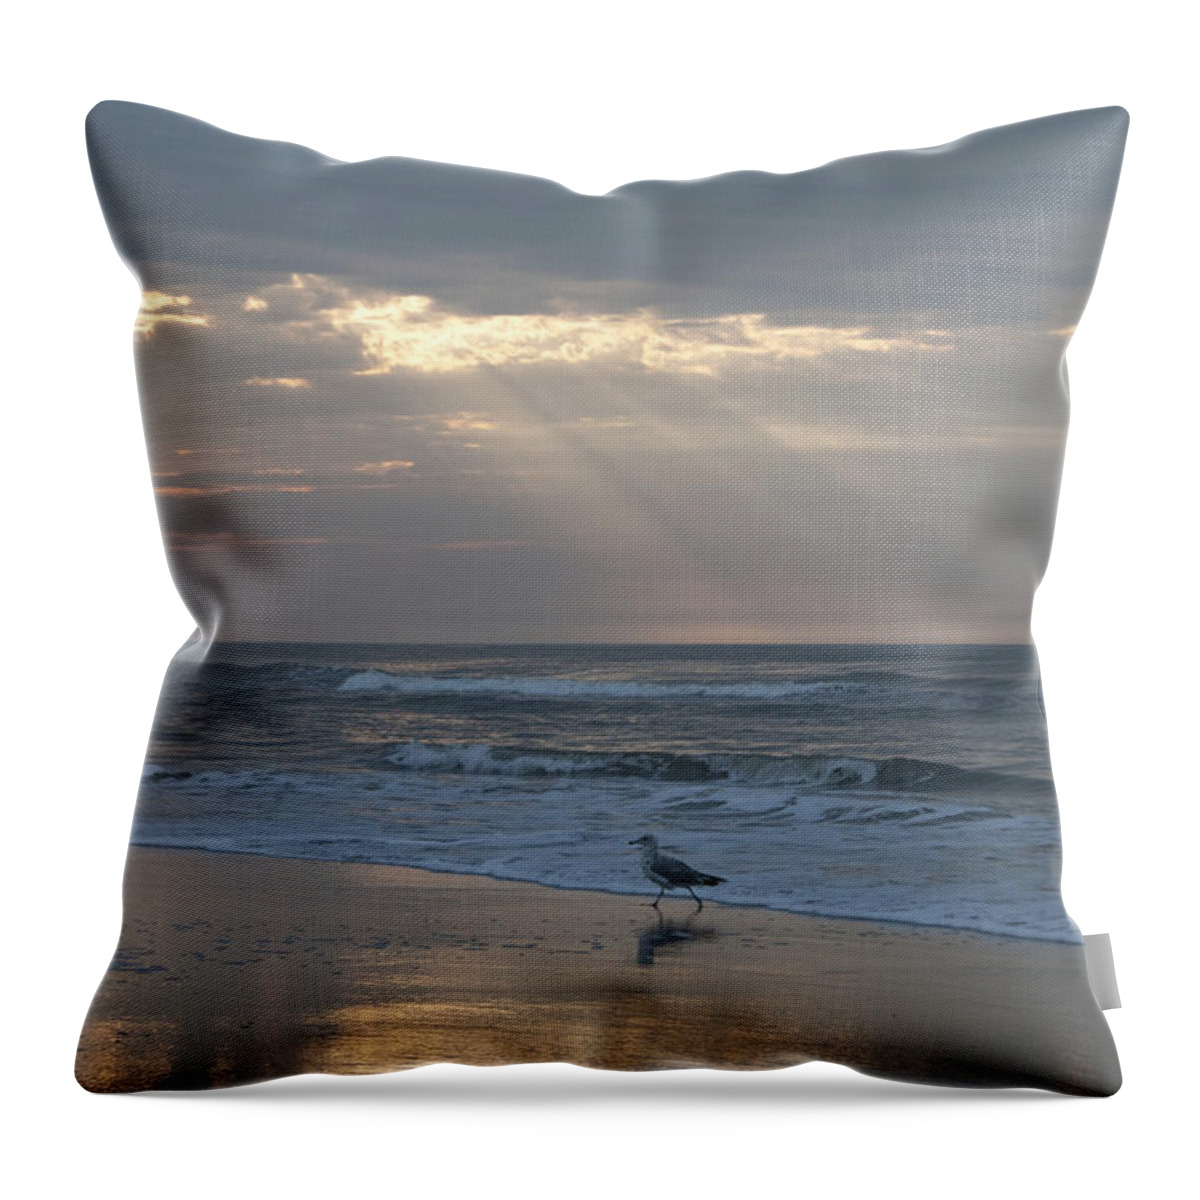 Solitude Throw Pillow featuring the photograph Solitude by Bill Cannon